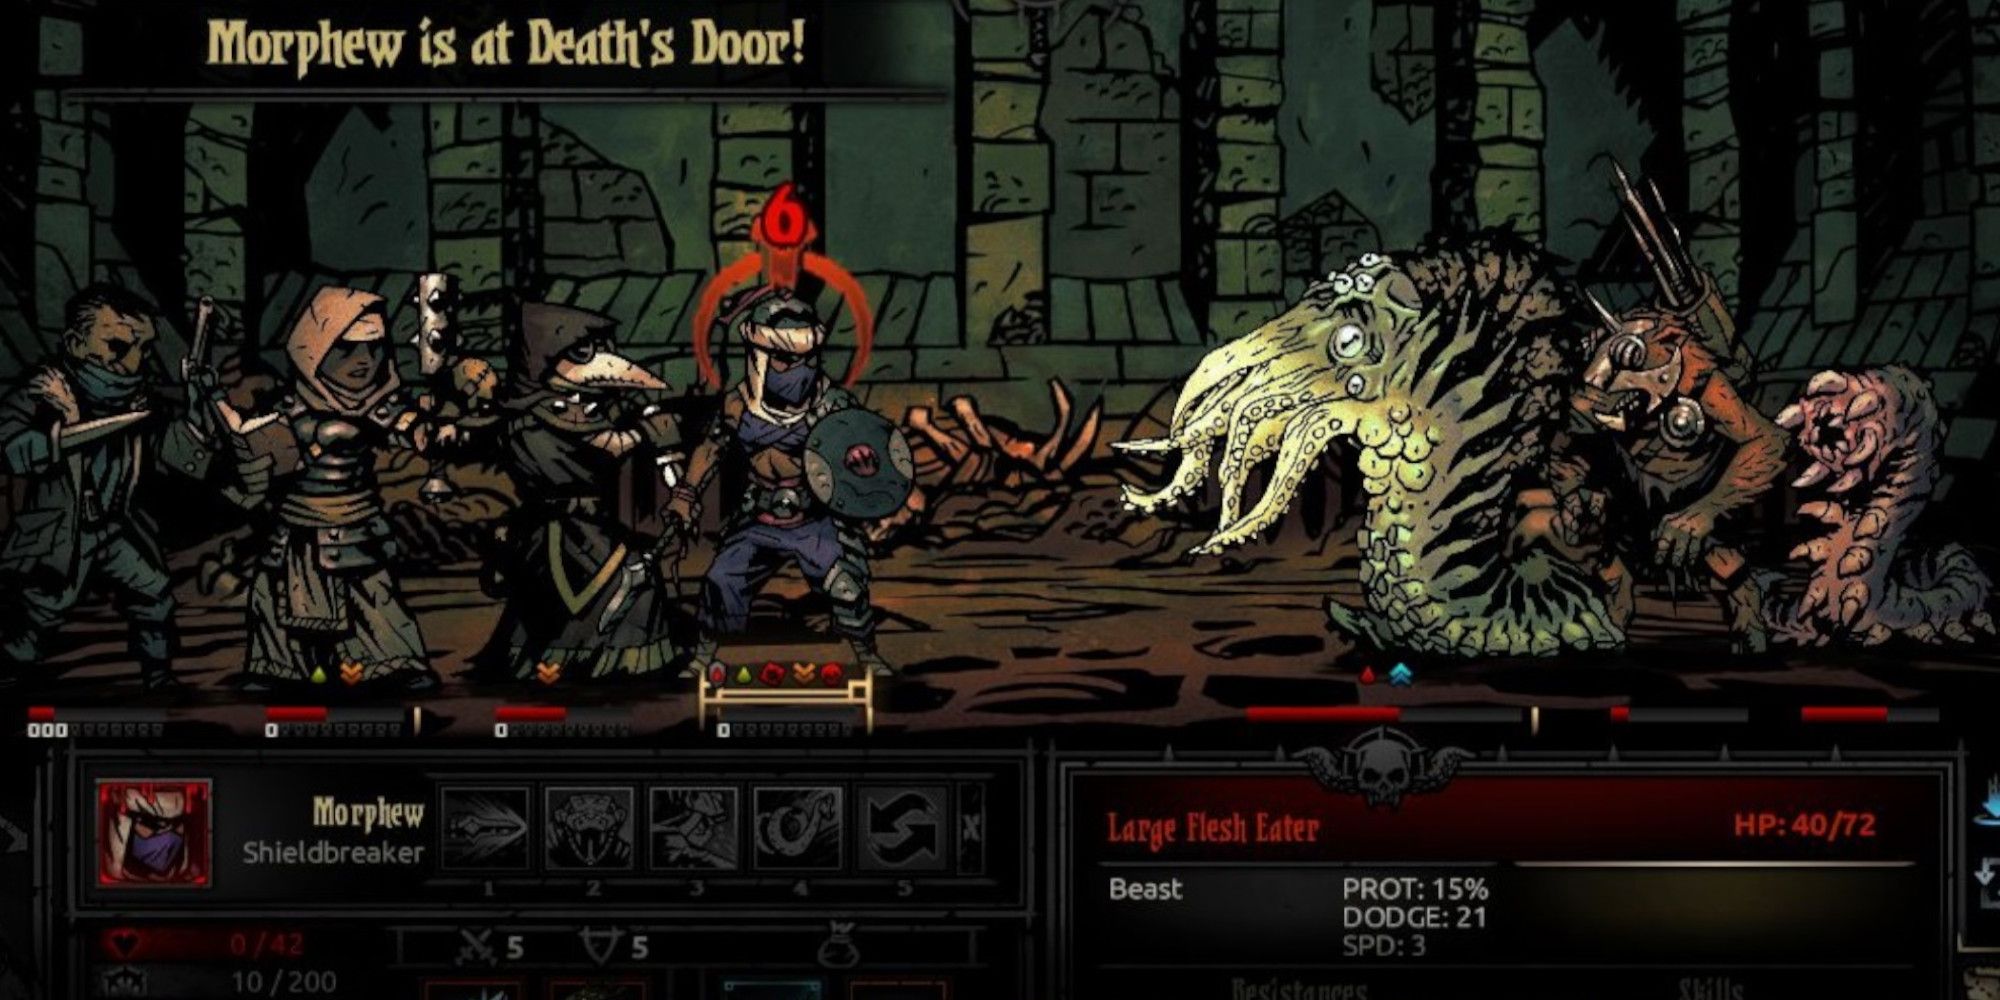 The Shieldbreaker is left on deaths door after an attack